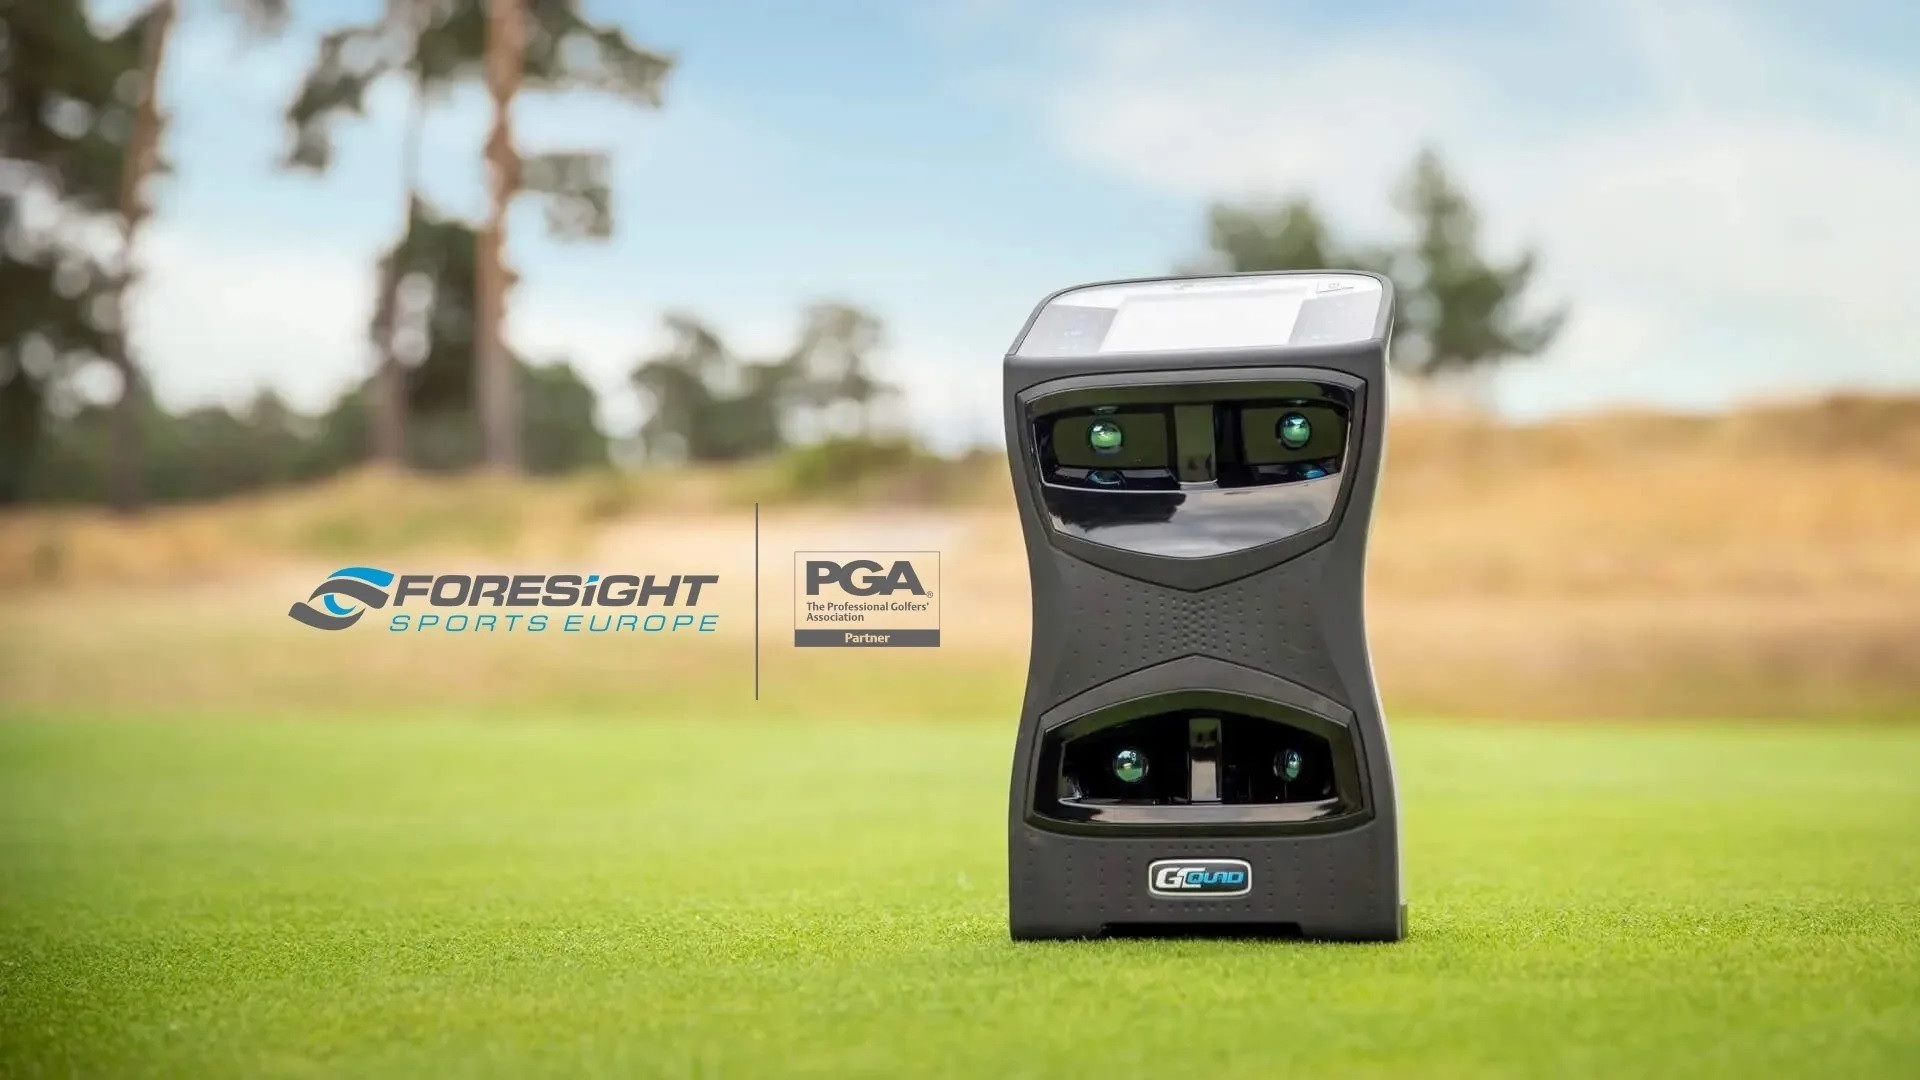 Foresight Sports Europe simulators to feature at British Golf Show after PGA partnership